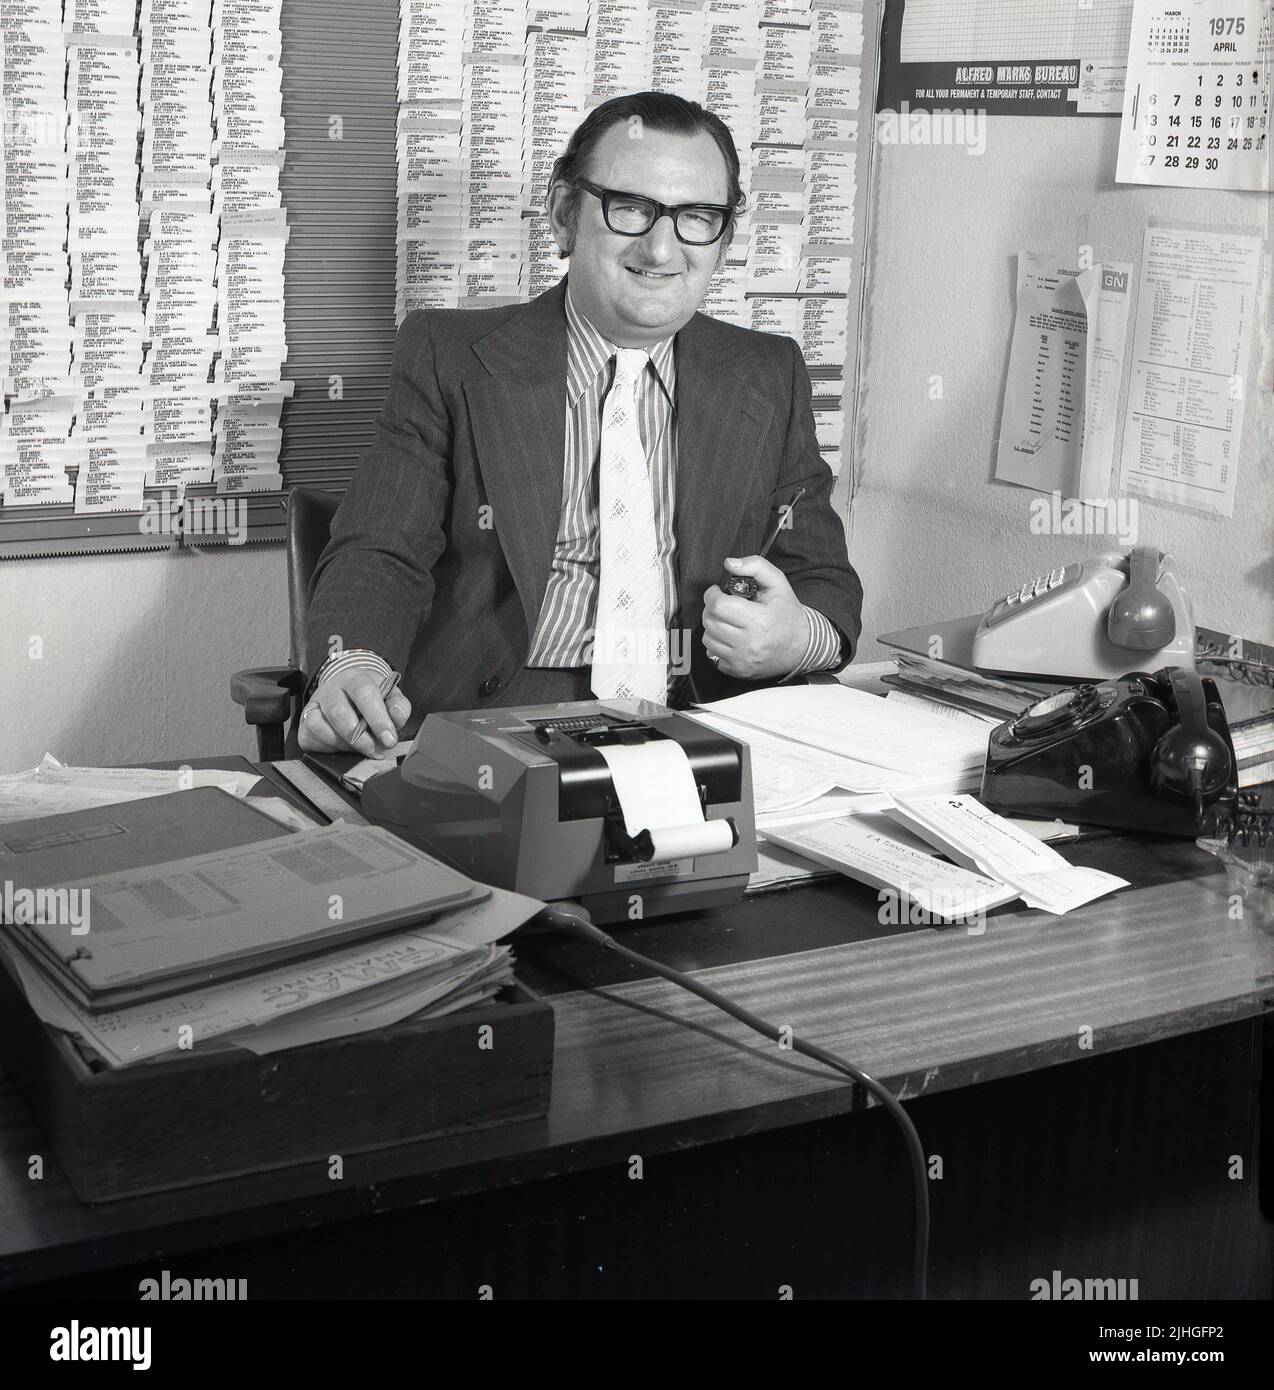 1975, historical, a manager in a car dealership sitting at his desk in his office, pipe in hand, telephones and adding machine of the era, Croydon, England, UK. A wall card index and poster for Alfred Marks Bureau, the employment agency can be seen. Stock Photo